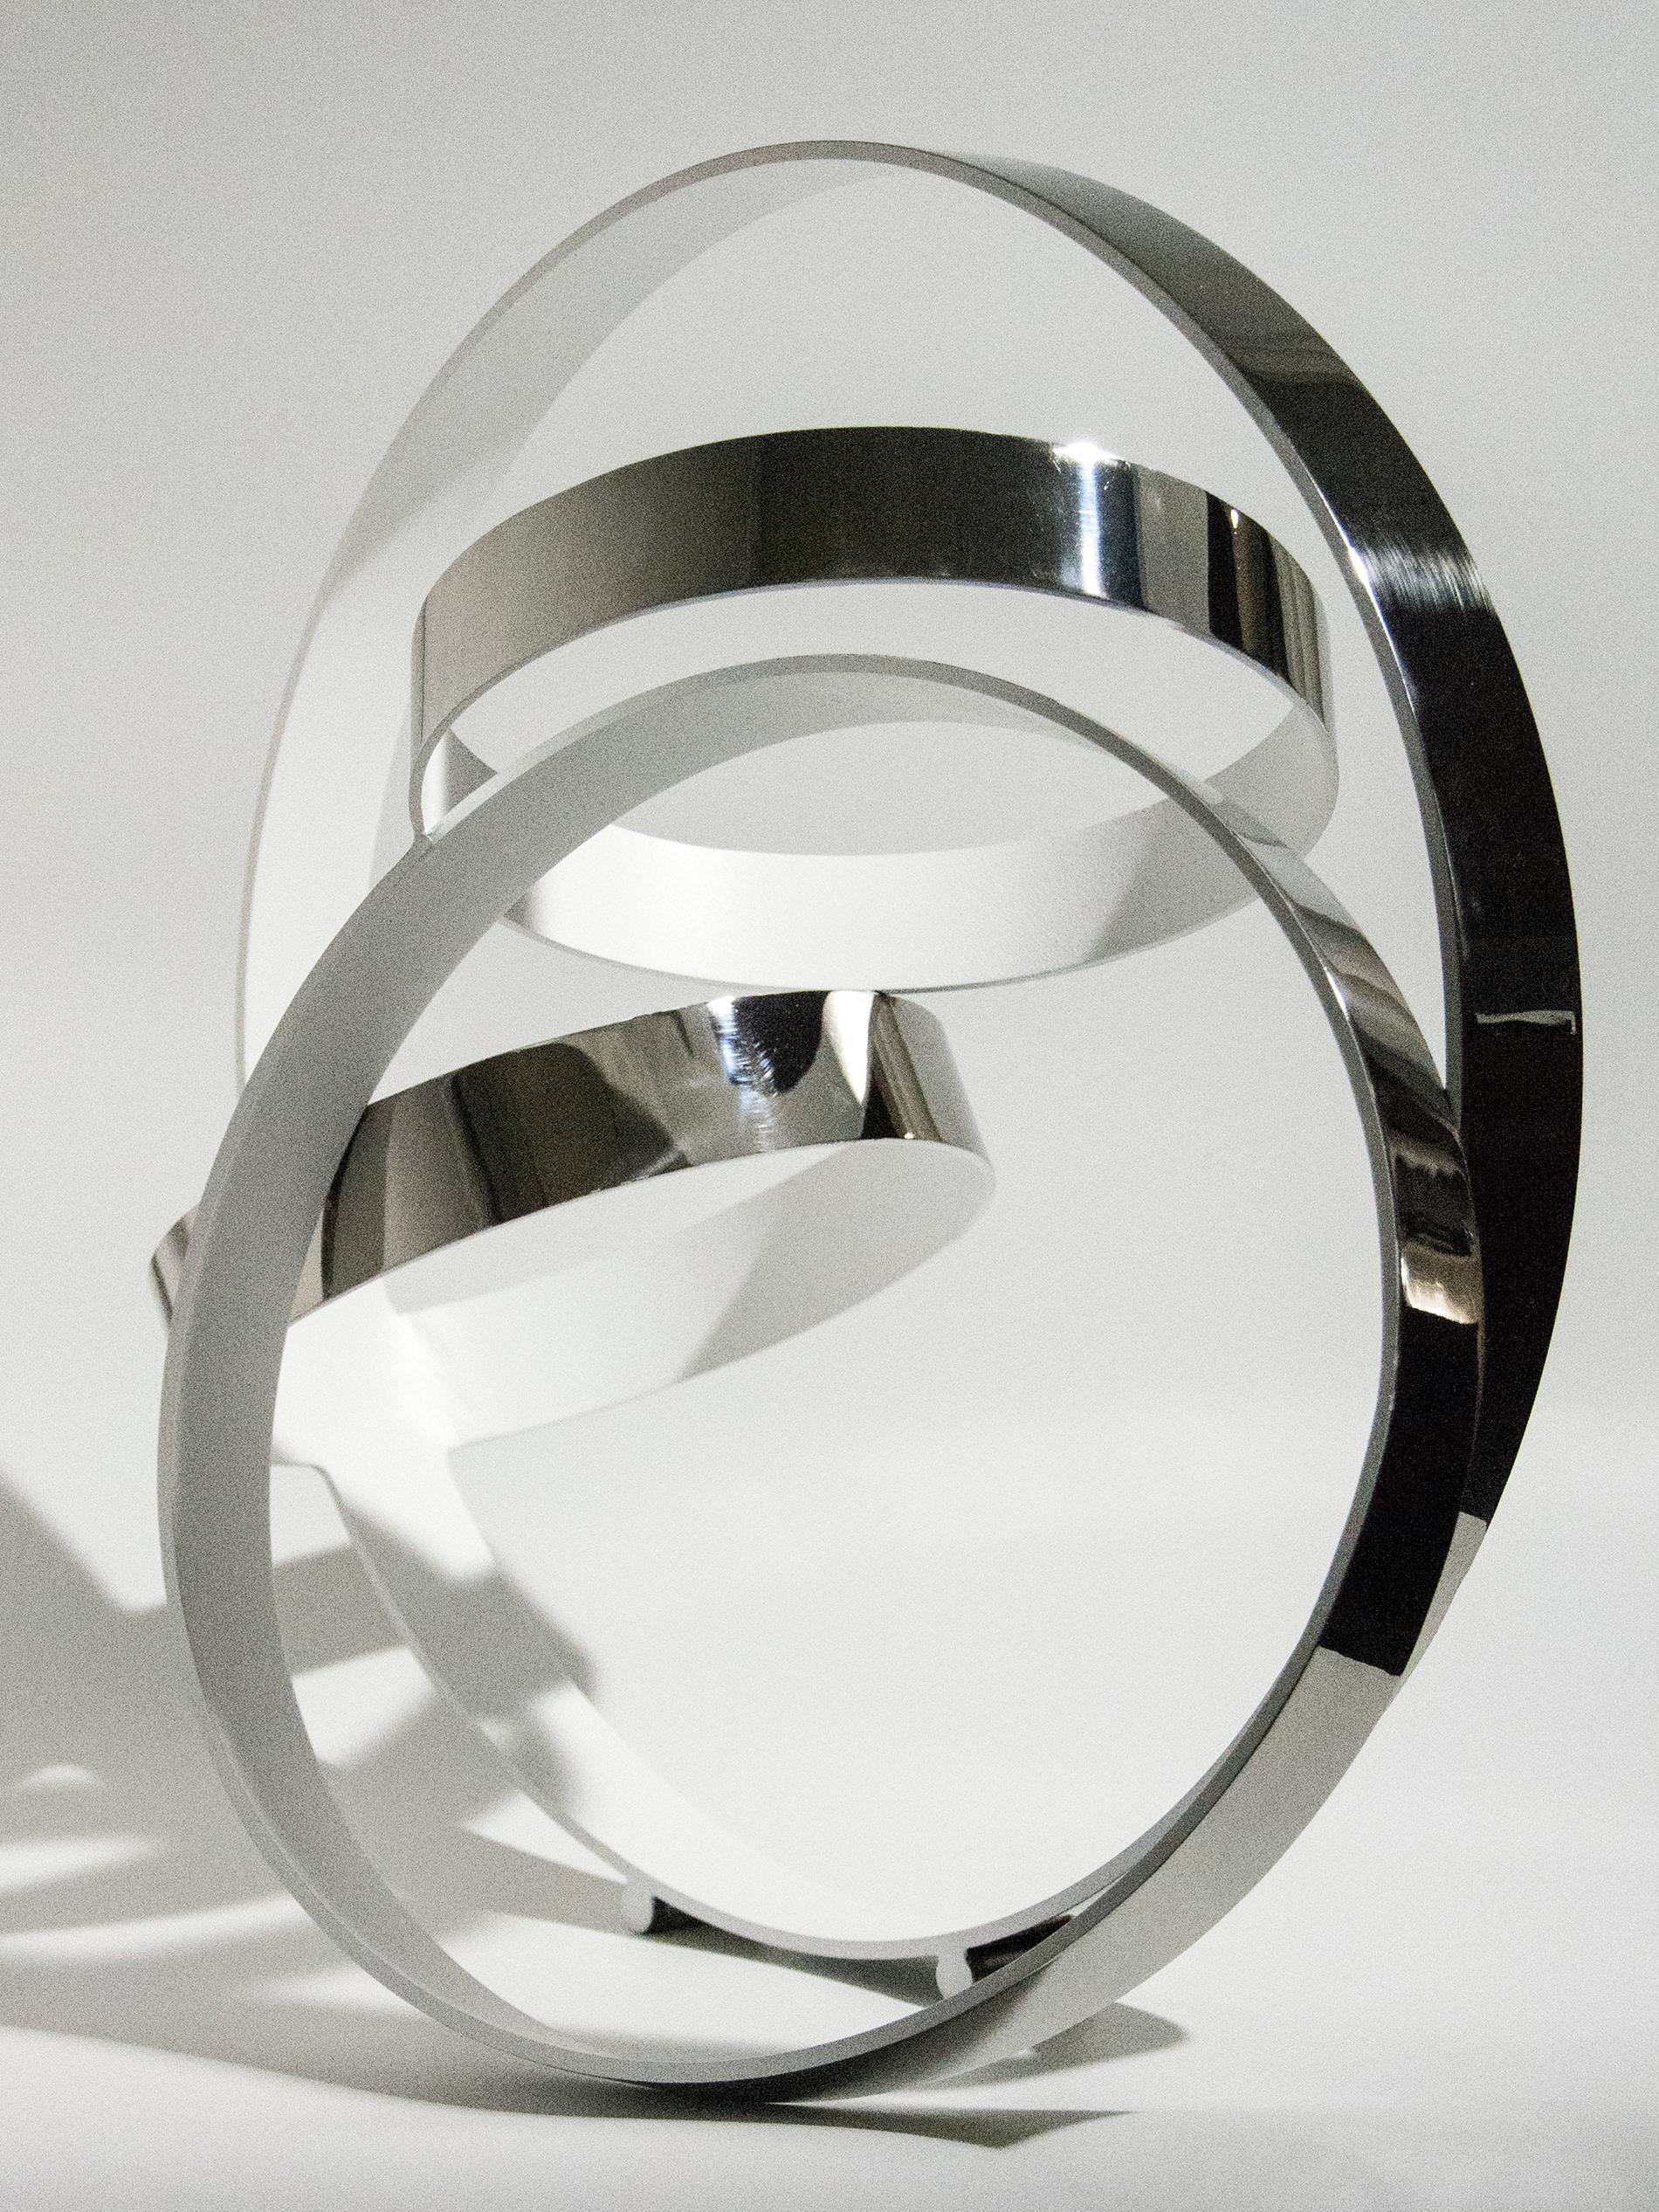 Four Ring Temps Zero White 3/10 - Stainless steel rings with white interior - Contemporary Sculpture by Philippe Pallafray